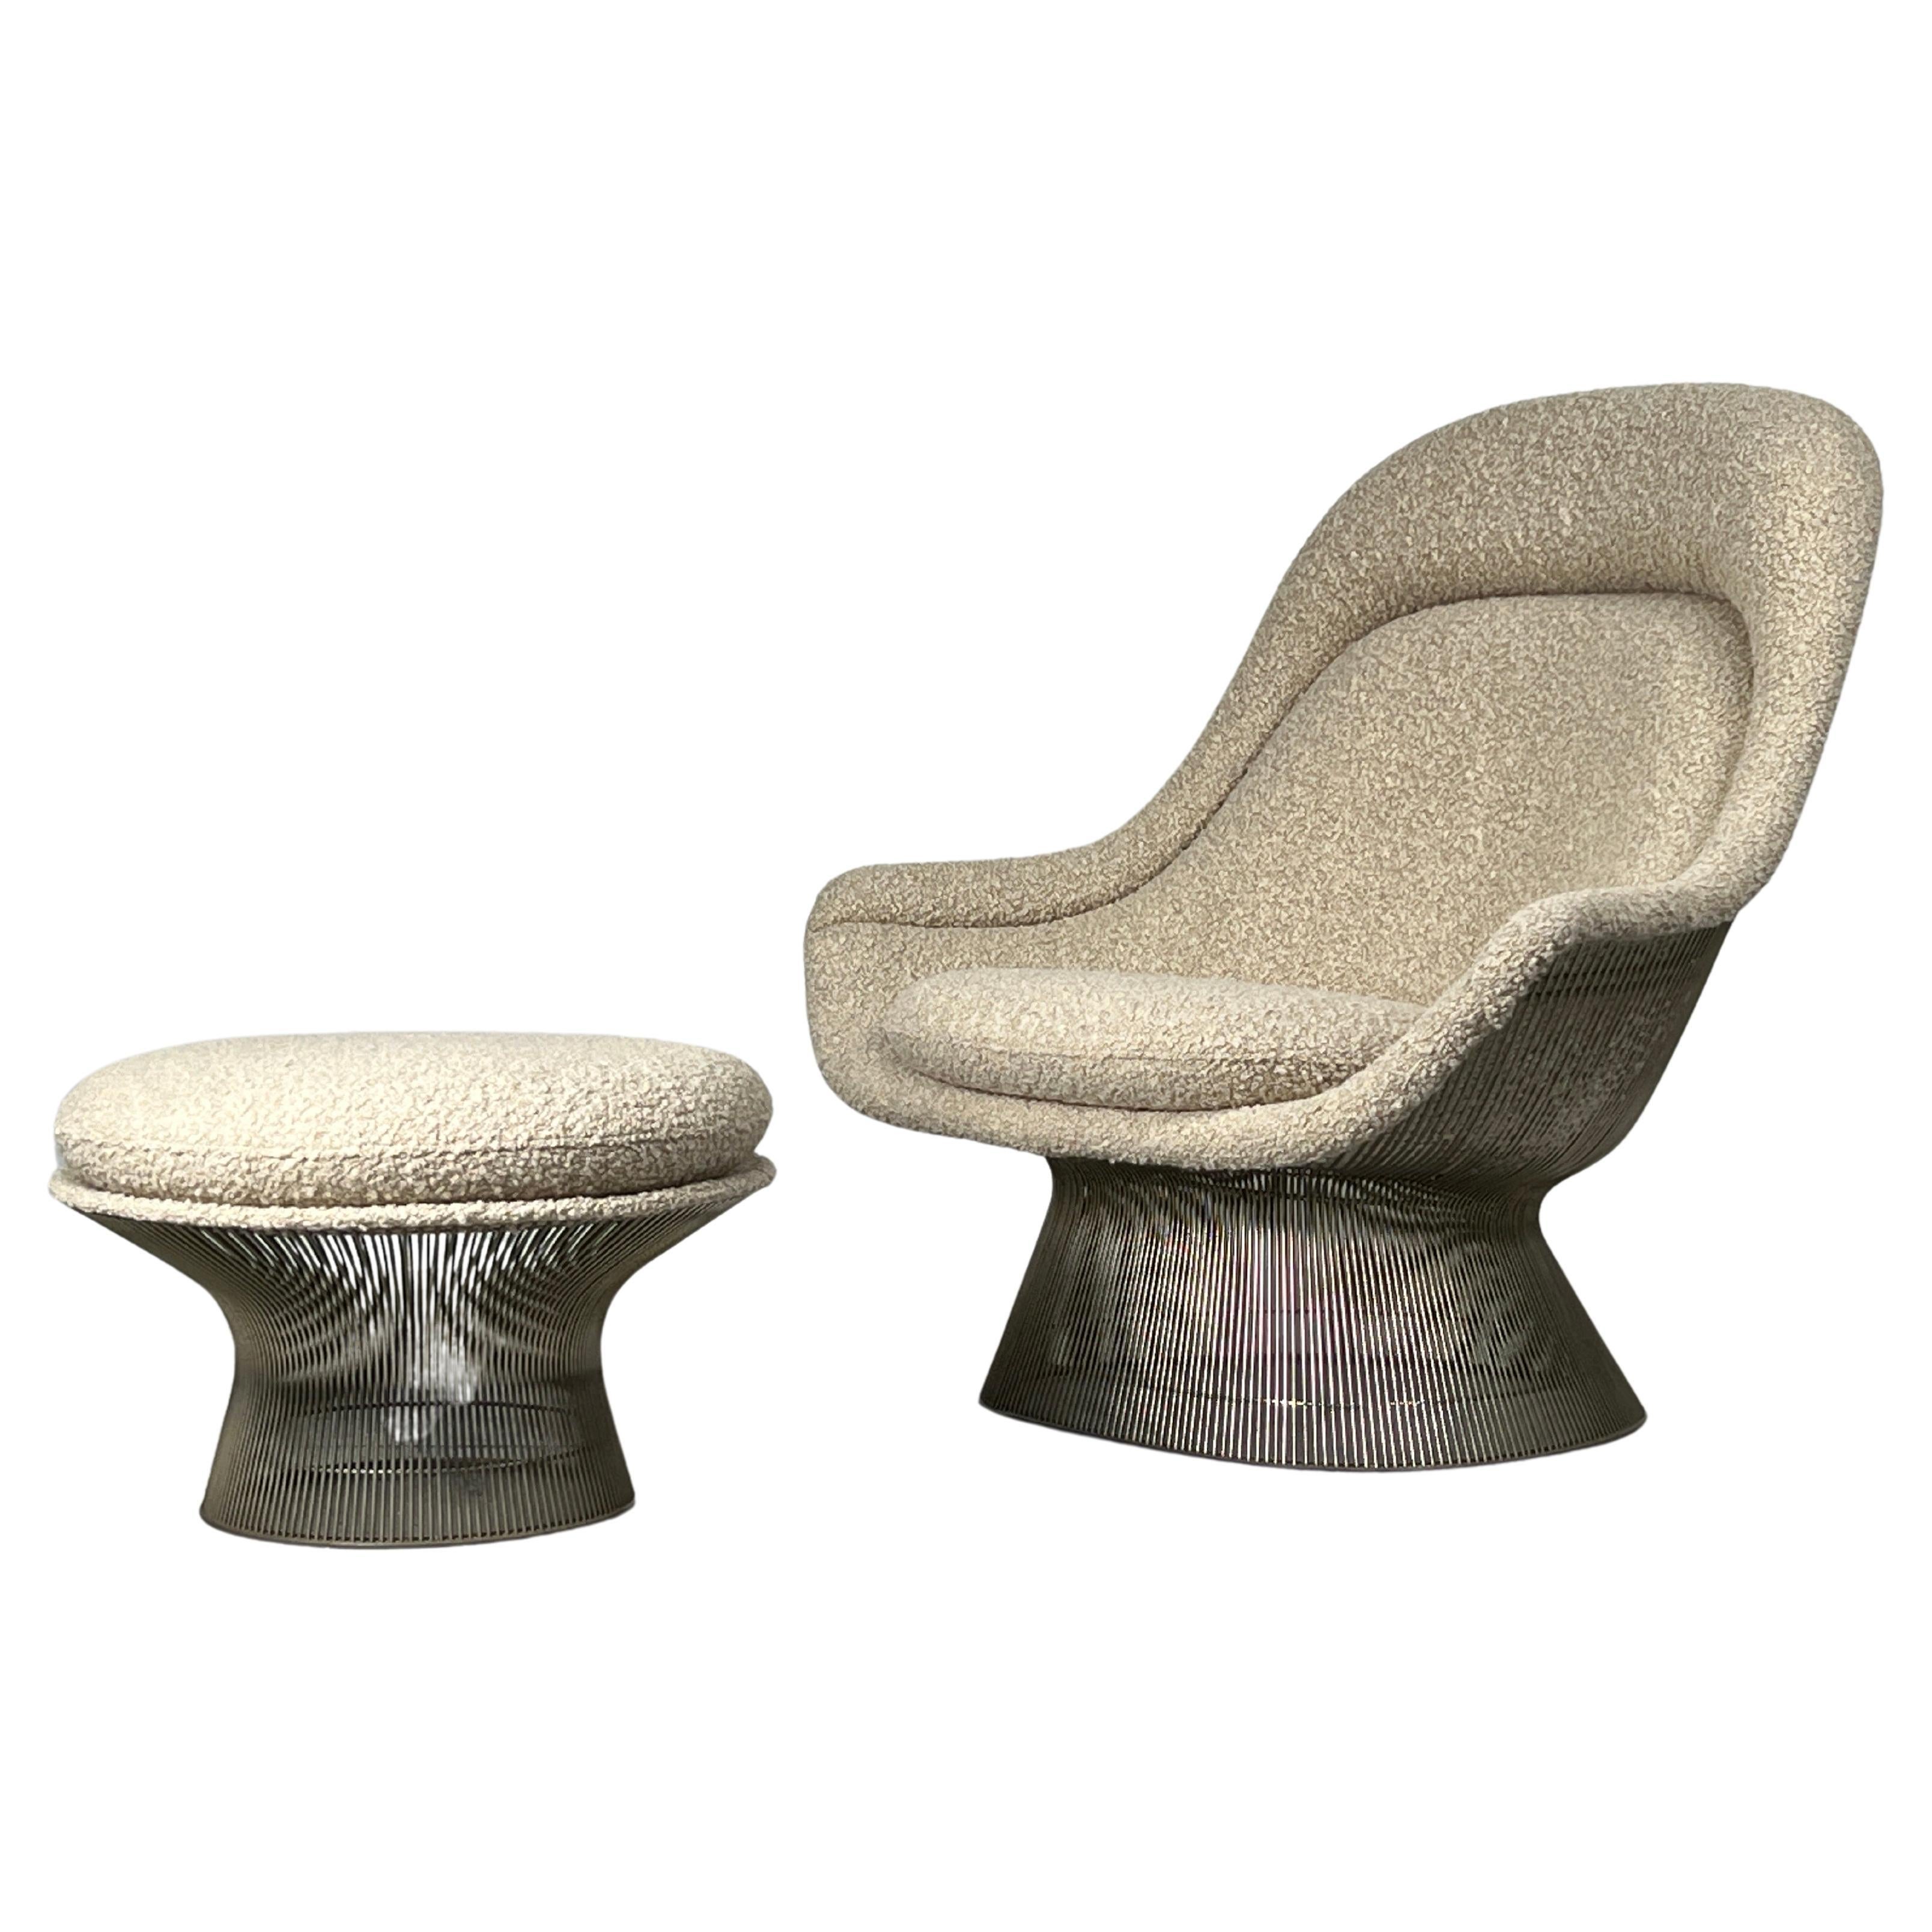 Warren Platner Throne Lounge chair and Ottoman  For Sale